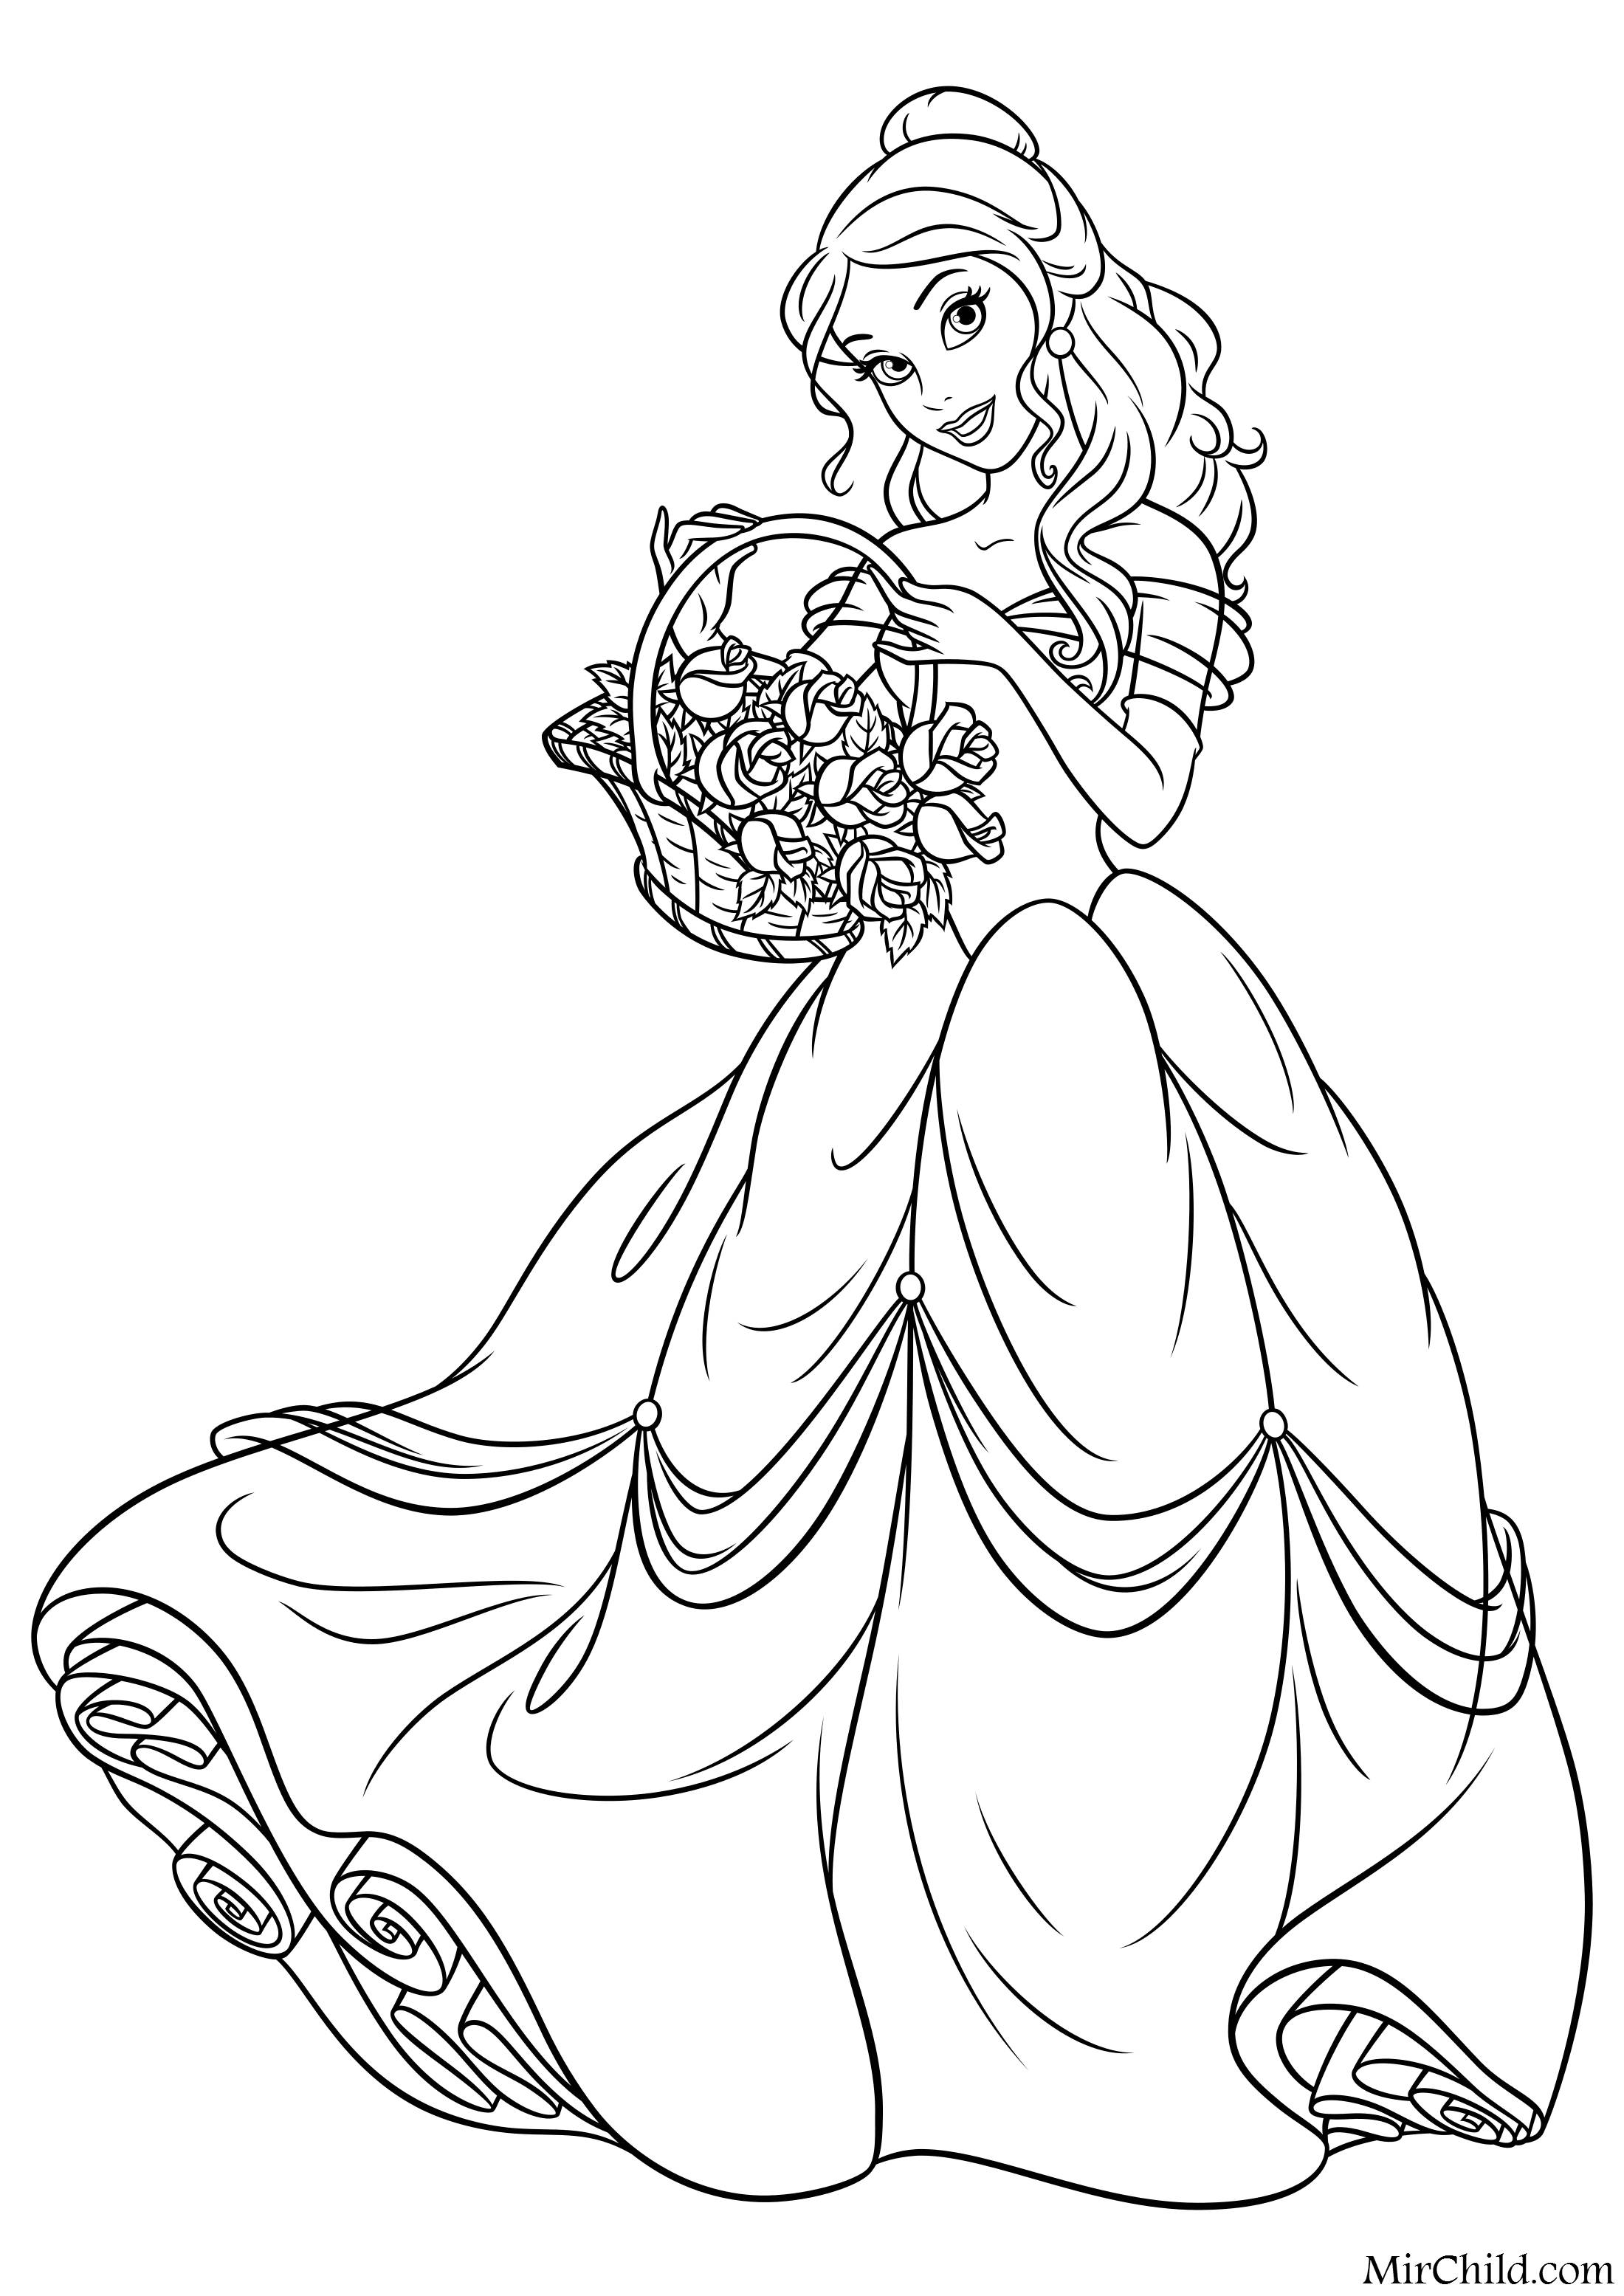 Shiny princess coloring book for girls